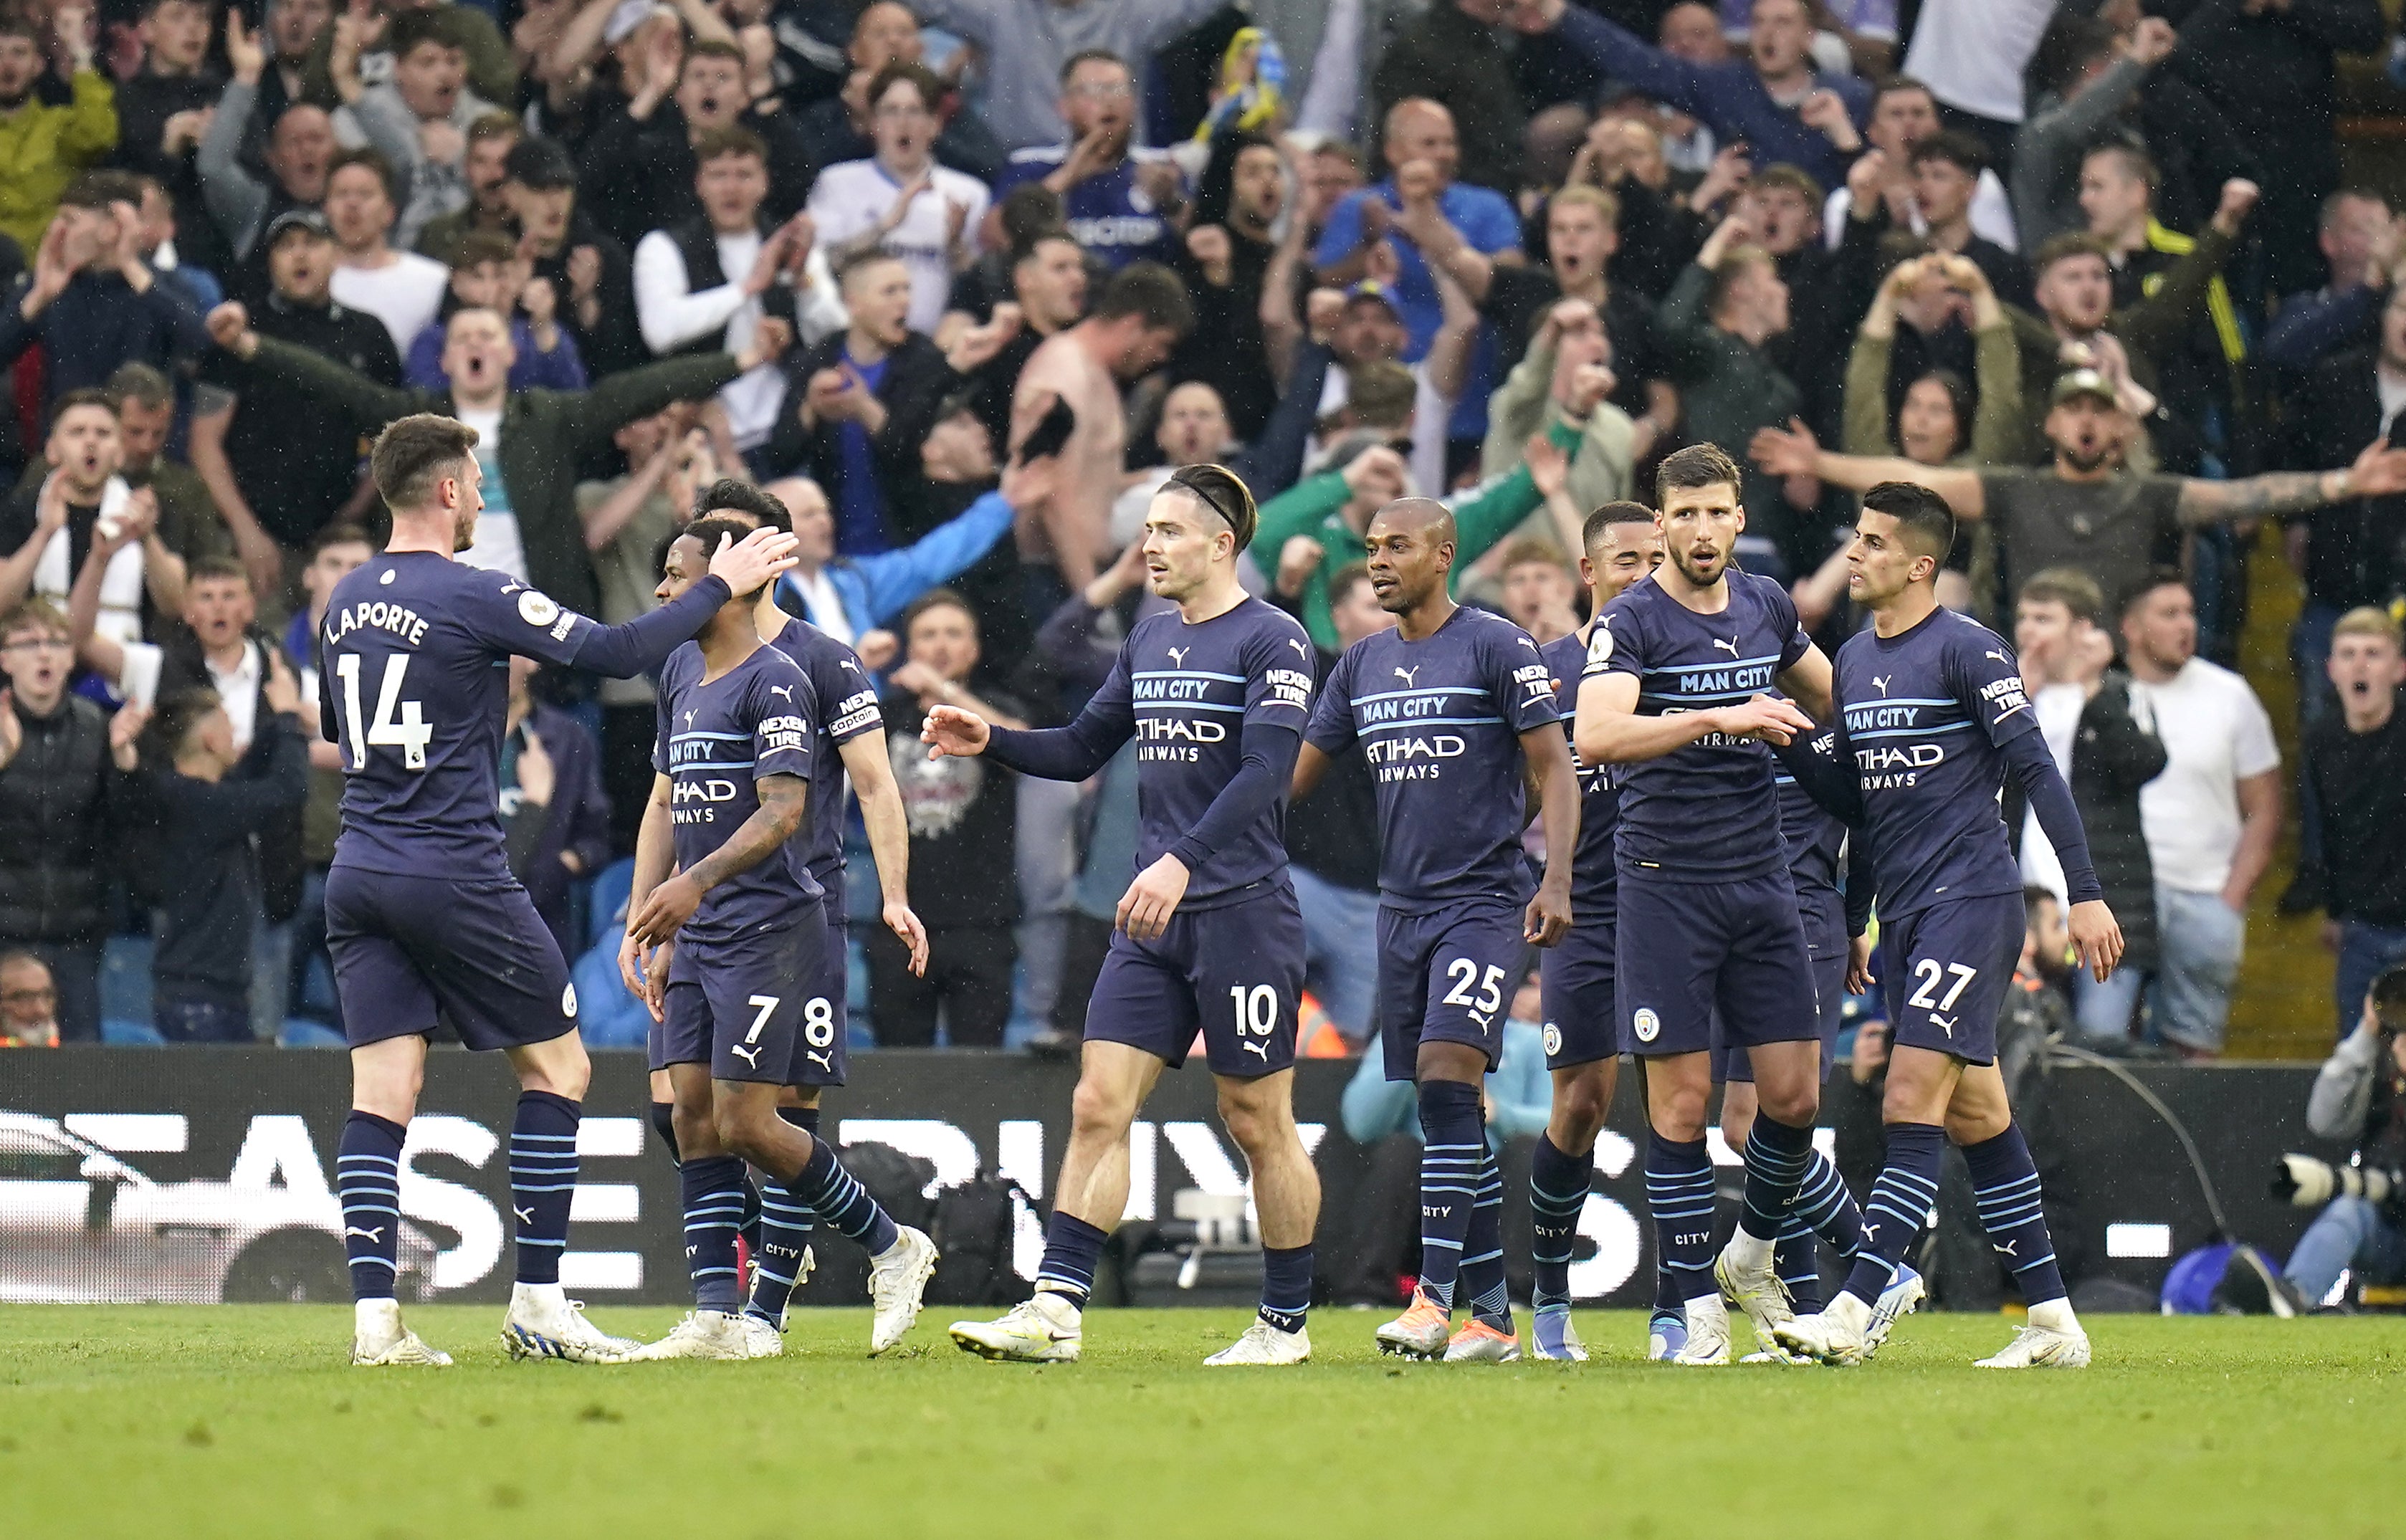 Manchester City ran out 4-0 winners over Leeds (Danny Lawson/PA)